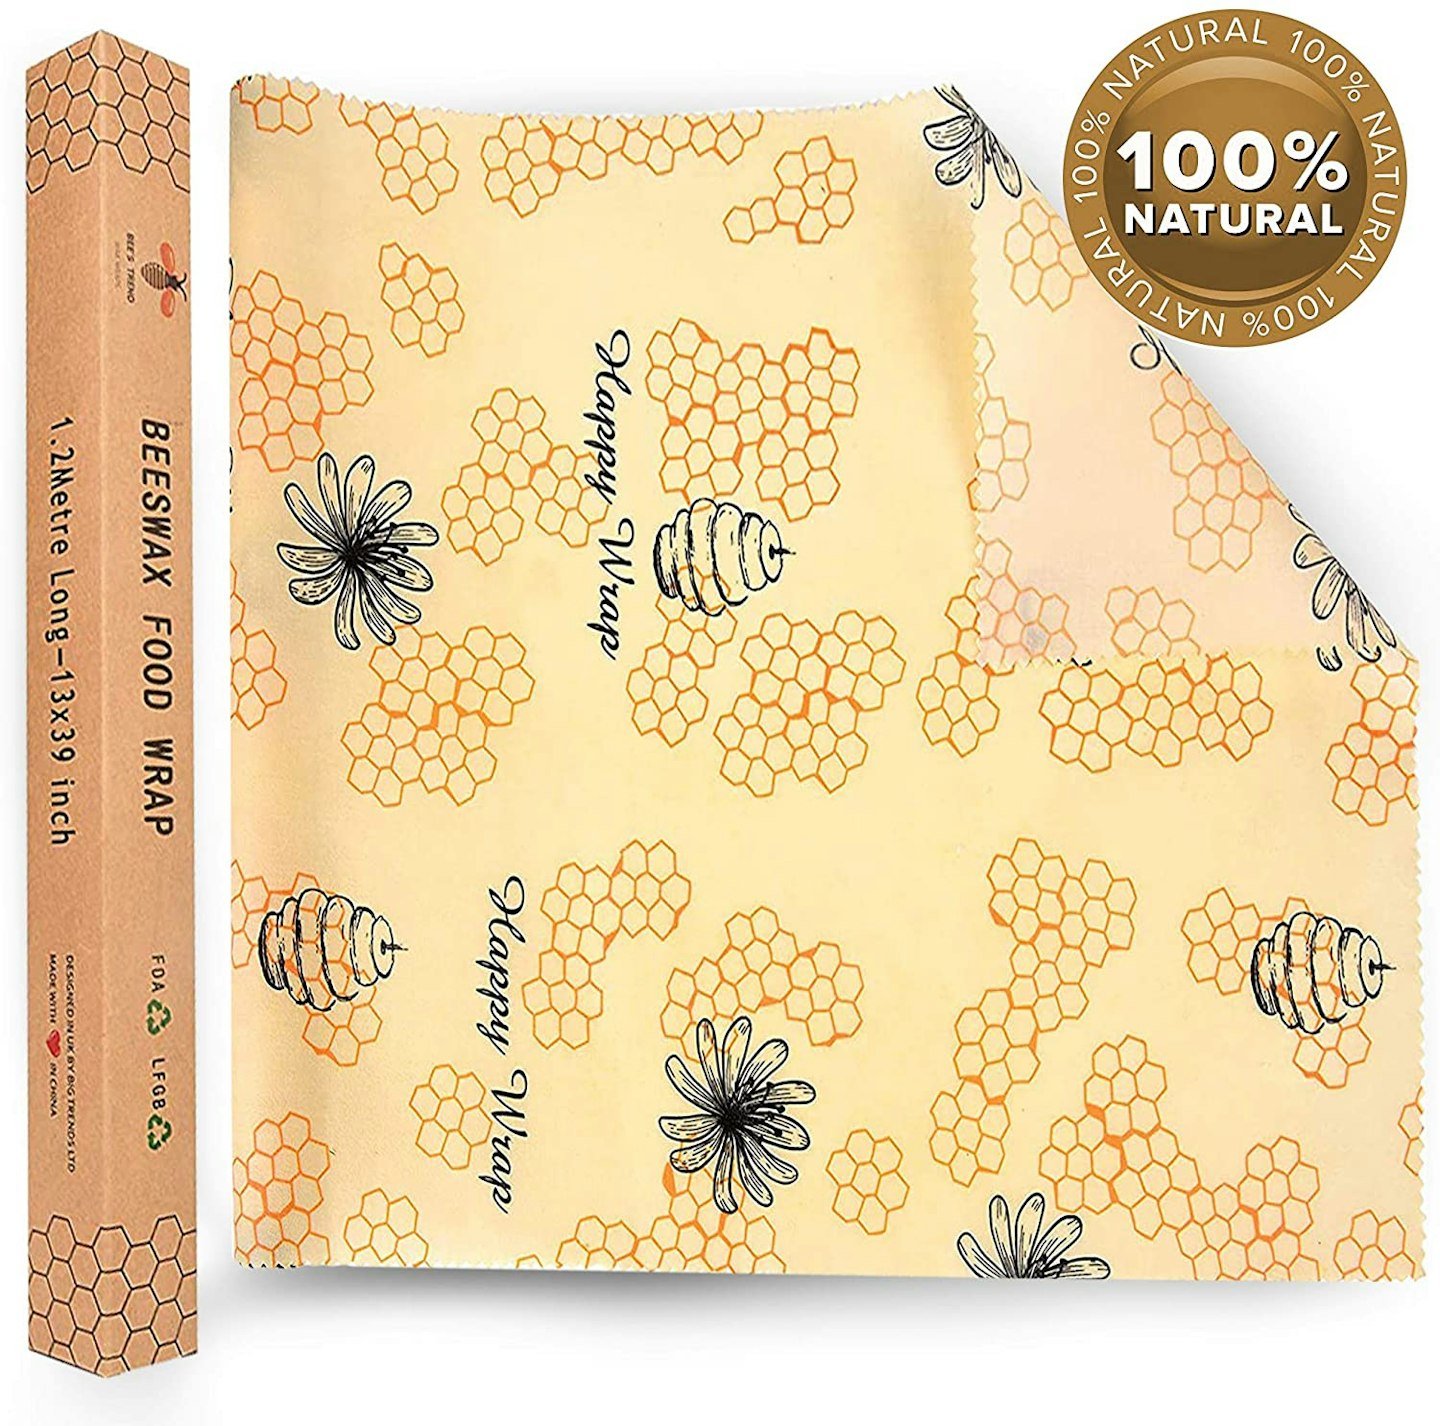 Large Reusable Beeswax Food Wrap Roll